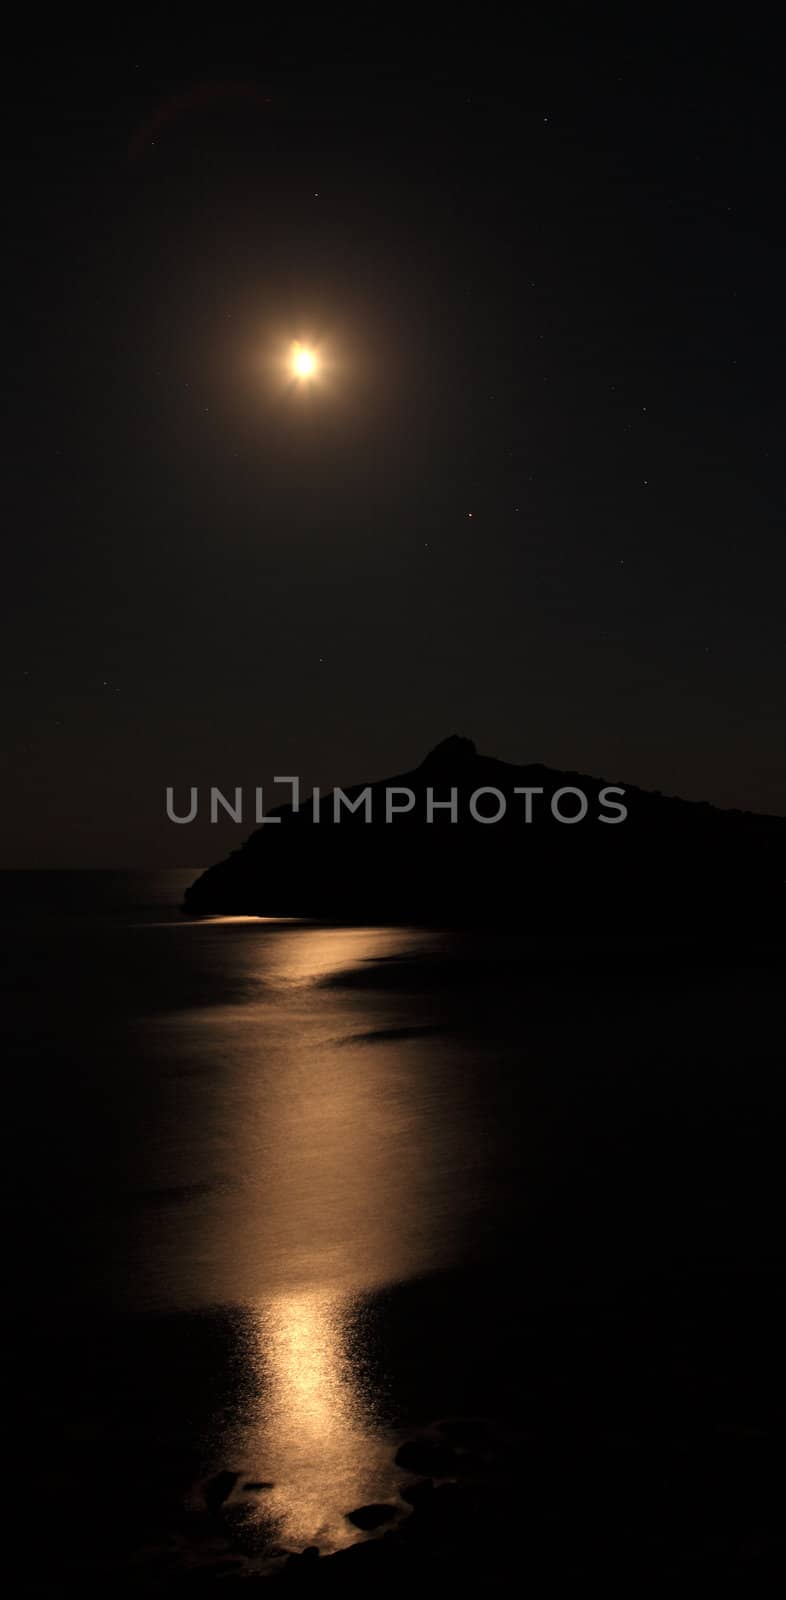 Seascape at night. The coastline moonlight and stars in the sky by aptyp_kok